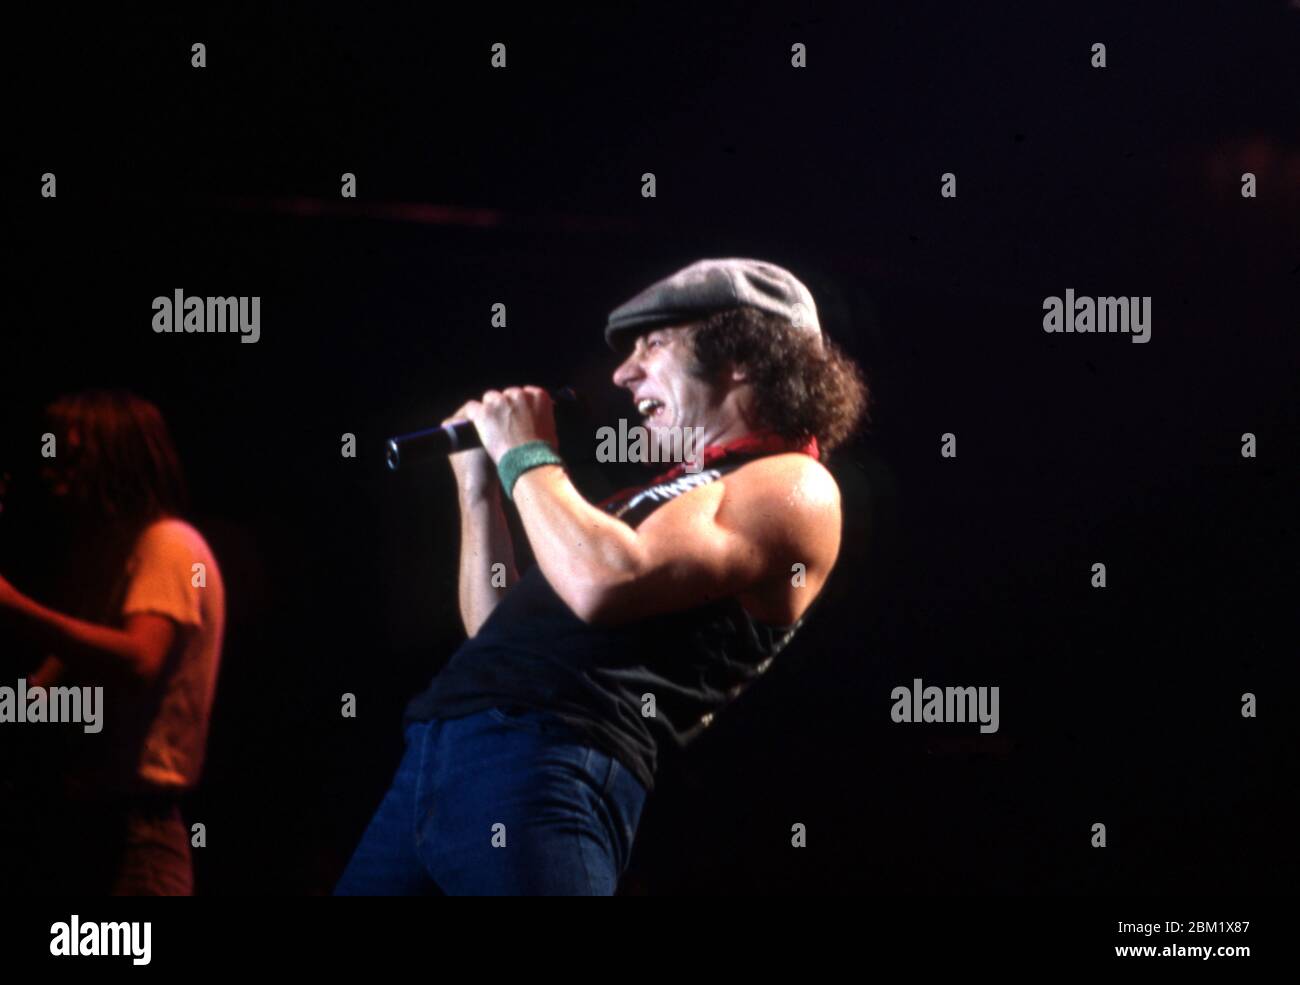 DETROIT - NOVEMBER 17: Brian Johnson, lead singer for AC/DC, performs during the Flick of the Switch/Monsters of Rock tour, on November 17, 1983, in Detroit, Michigan. (Photo by Ross Marino/Rock Negatives) Stock Photo